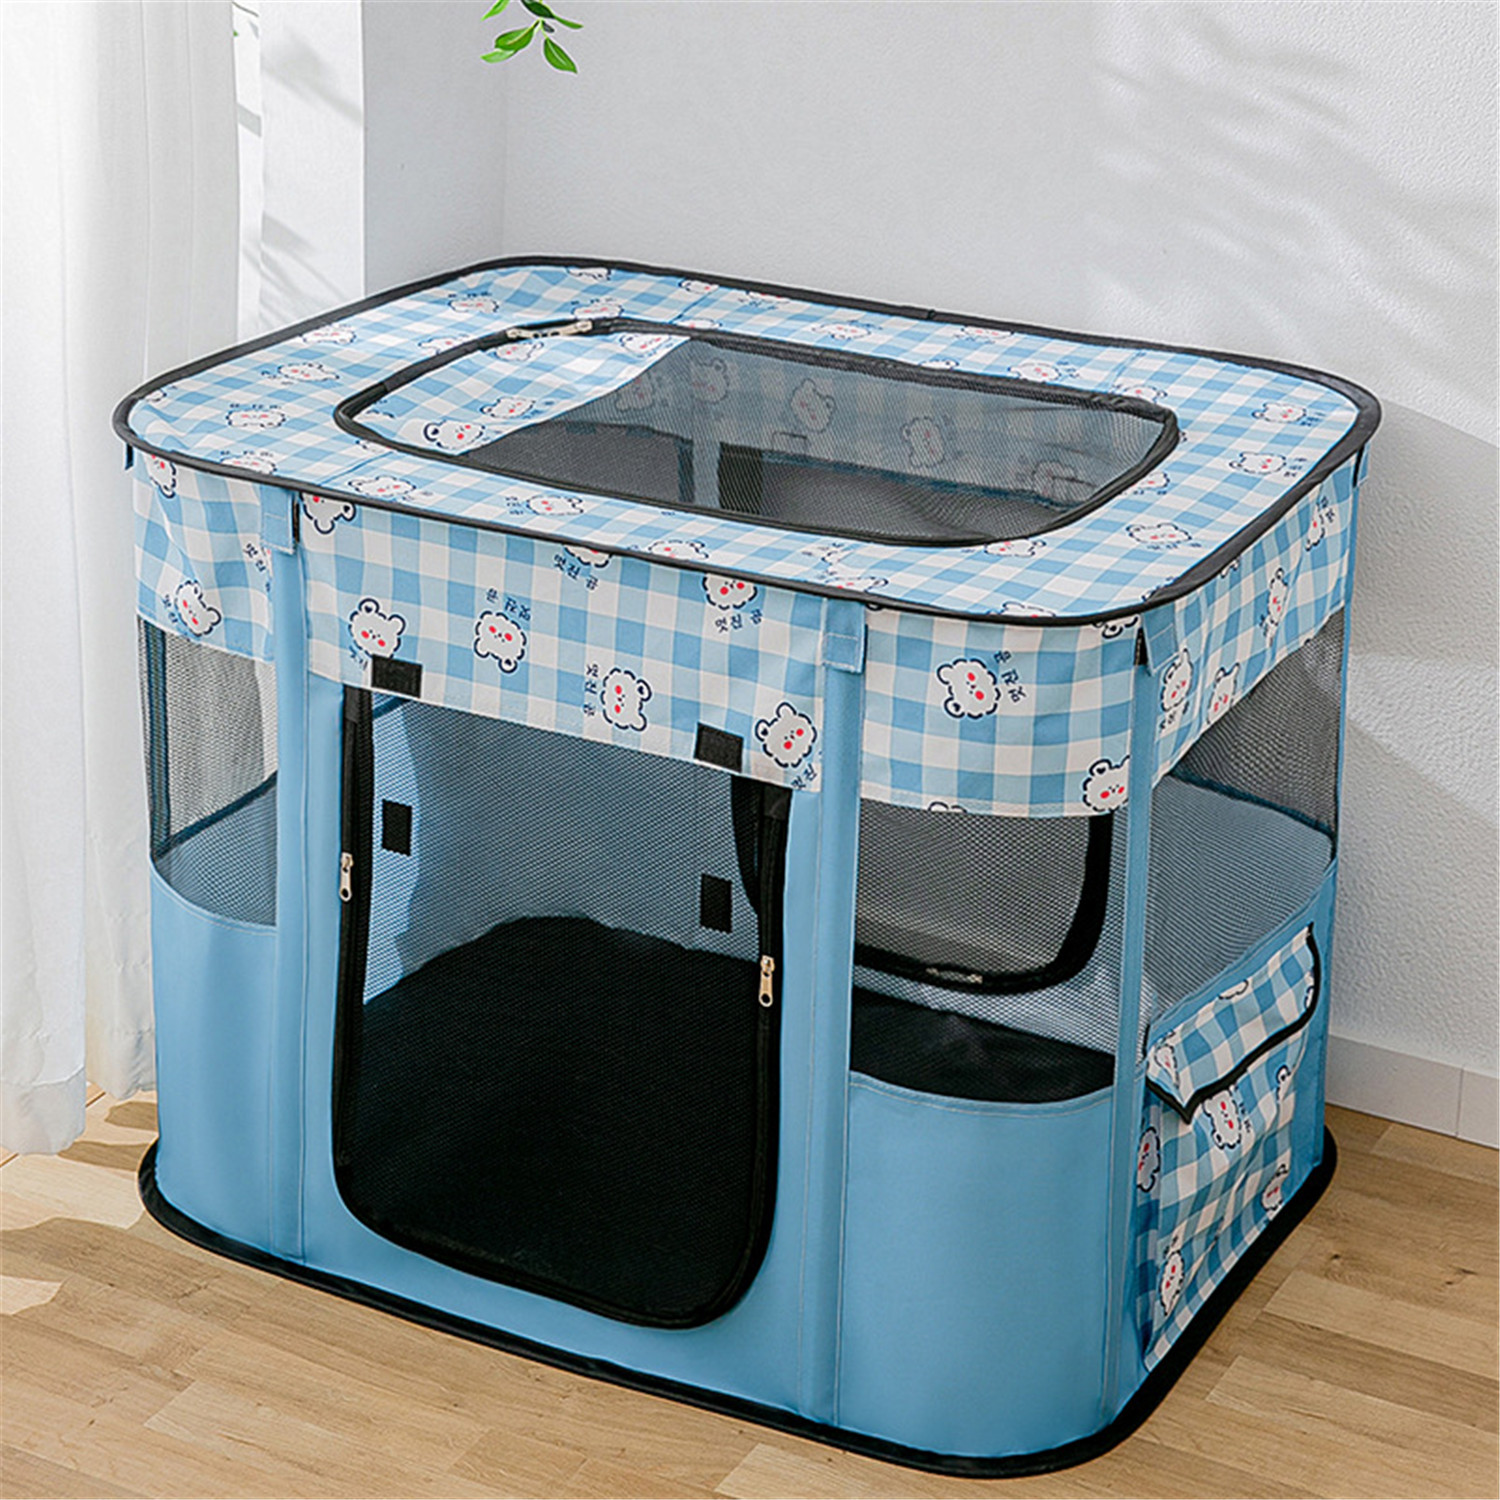 Pet Playpen Cat Playpen, Foldable Cat Playpen for Indoor Cats, Collapsible Crate Kennel Playpen, Kitten Playpen Cat Tent Indoor Outdoor, Pet Play Pen with Carrying Case for Cat Kitten Rabbit - image 1 of 10